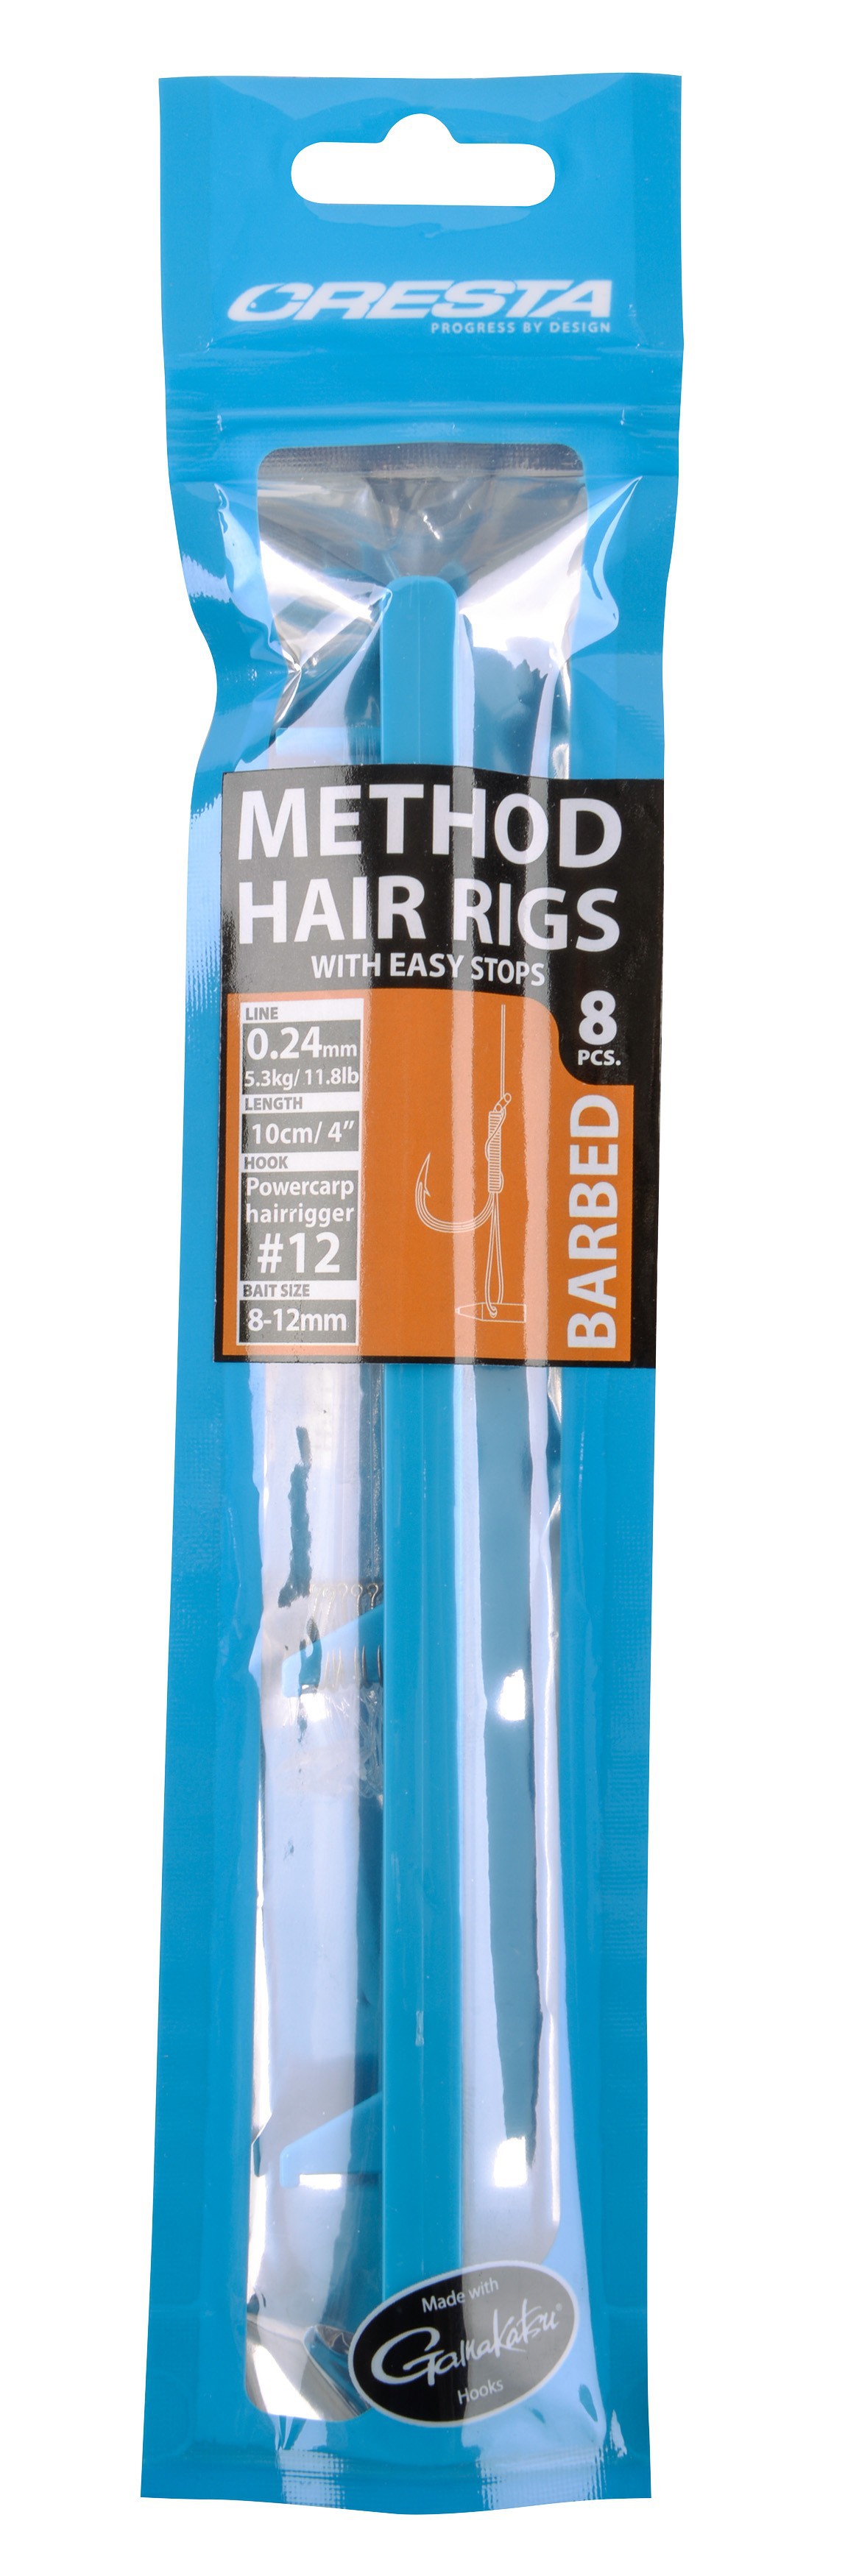 Spro - Cresta Method Hair Rigs With Easy Stops Barbed 4" – 10 cm Size 10